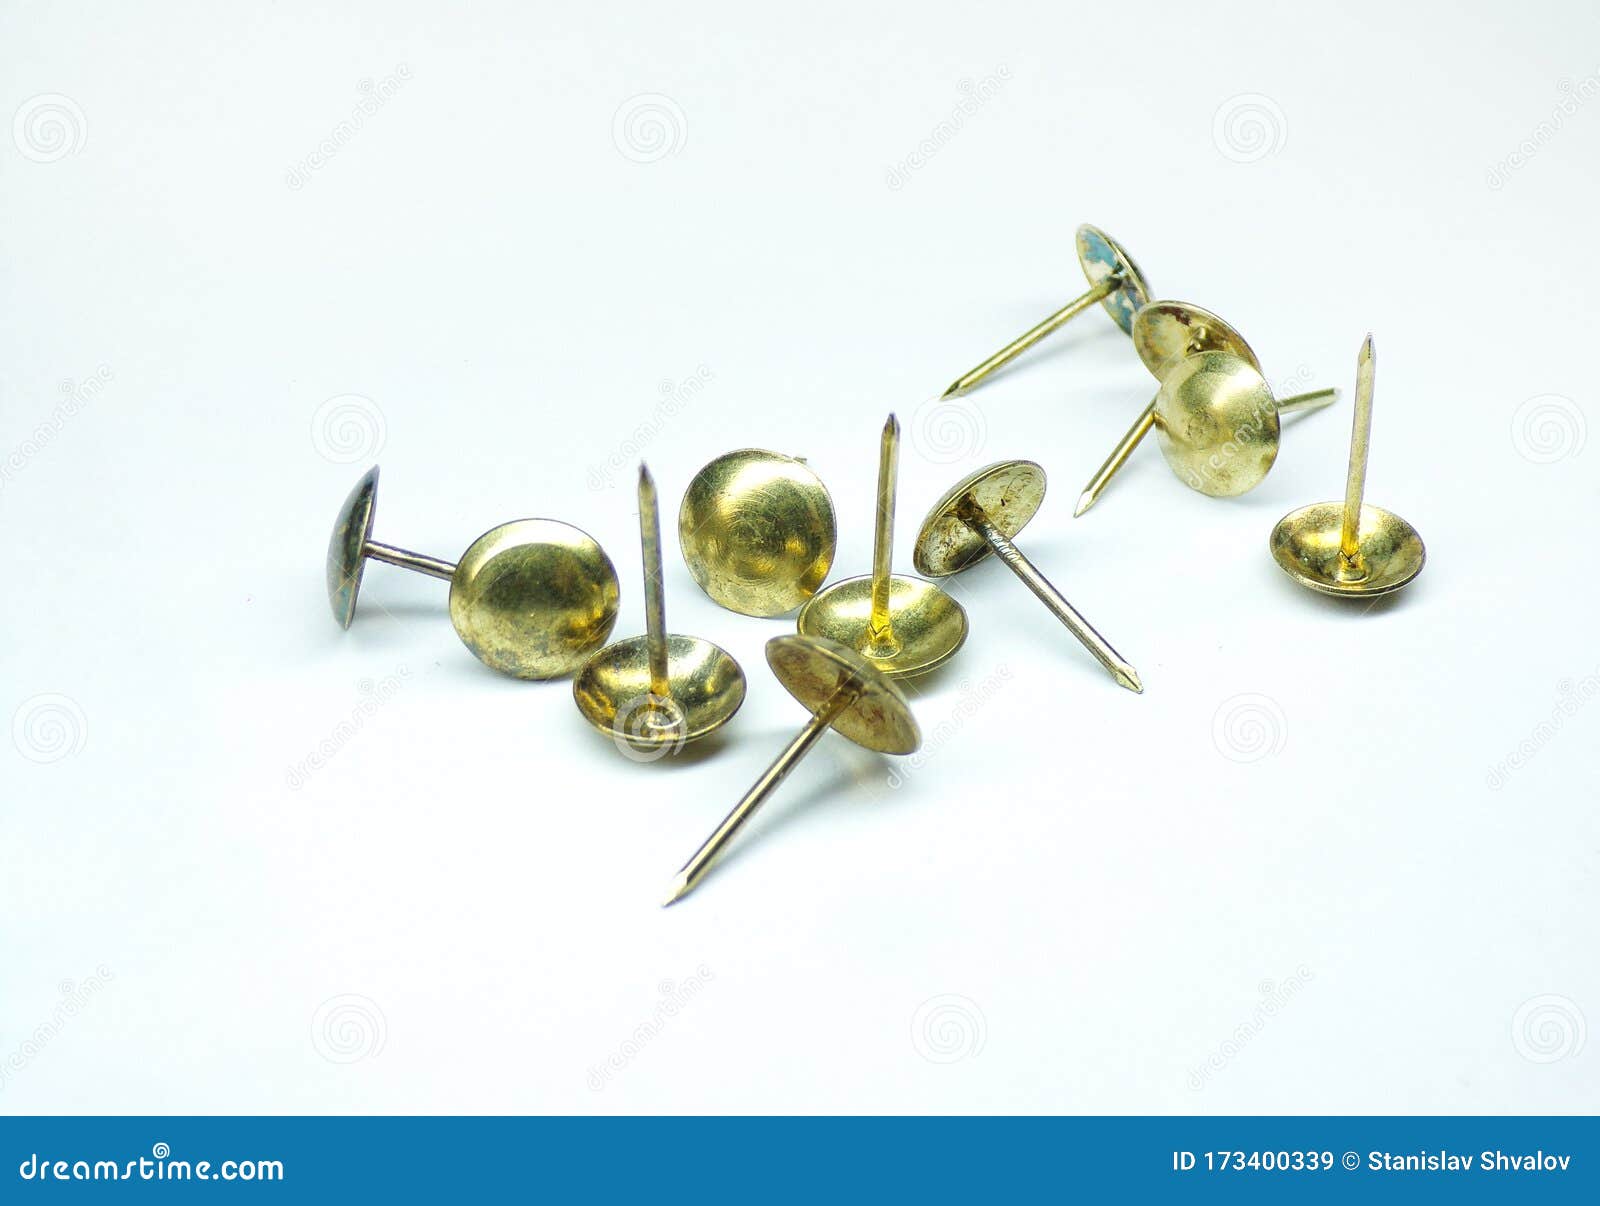 Lots of Metal Studs on a White Background. Stock Image - Image of bunch ...